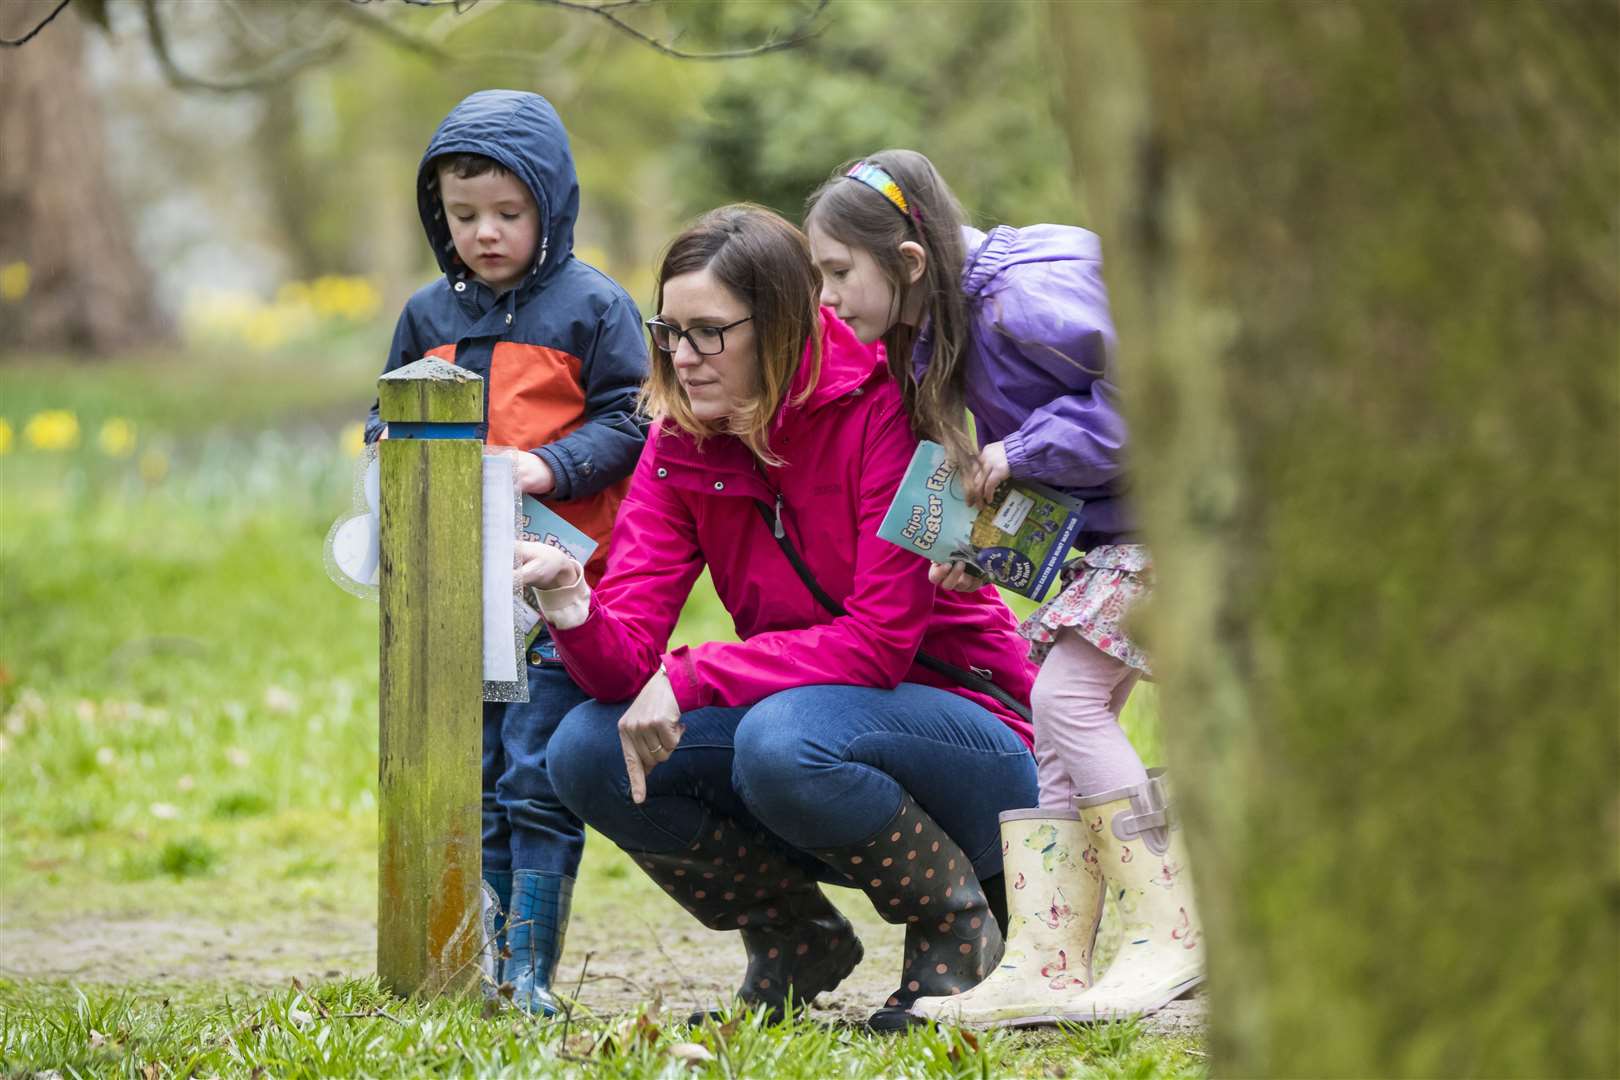 There are also Easter hunts and trails with Cadbury and the National Trust